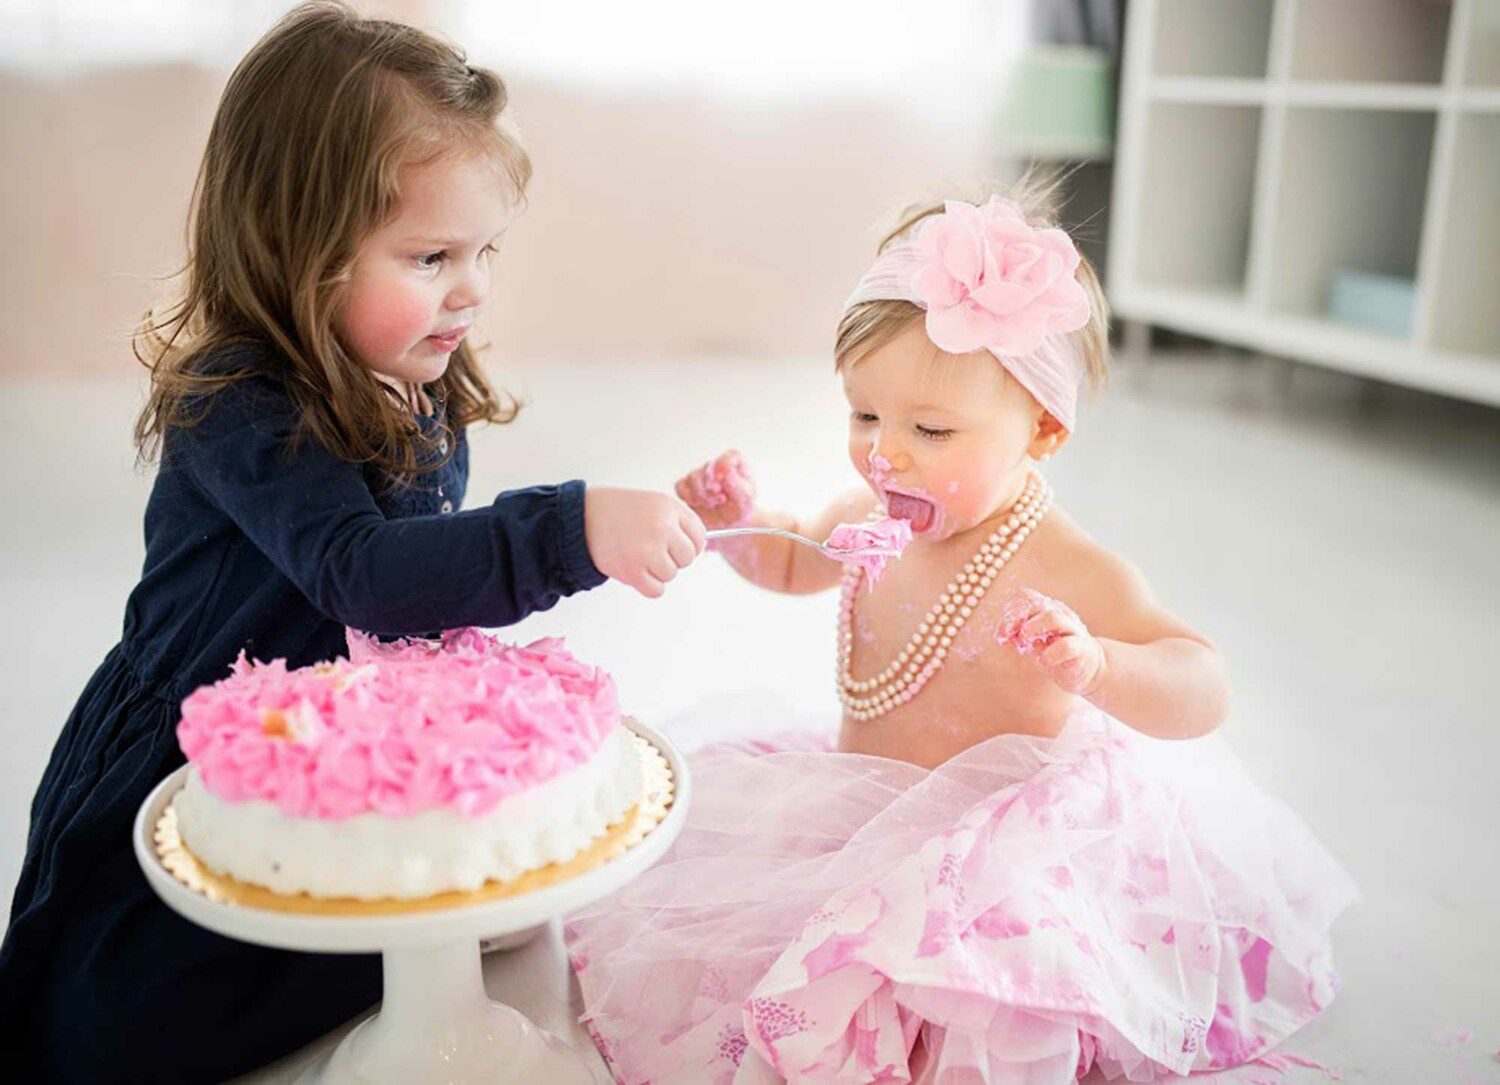 Gracie and Zee eating cake